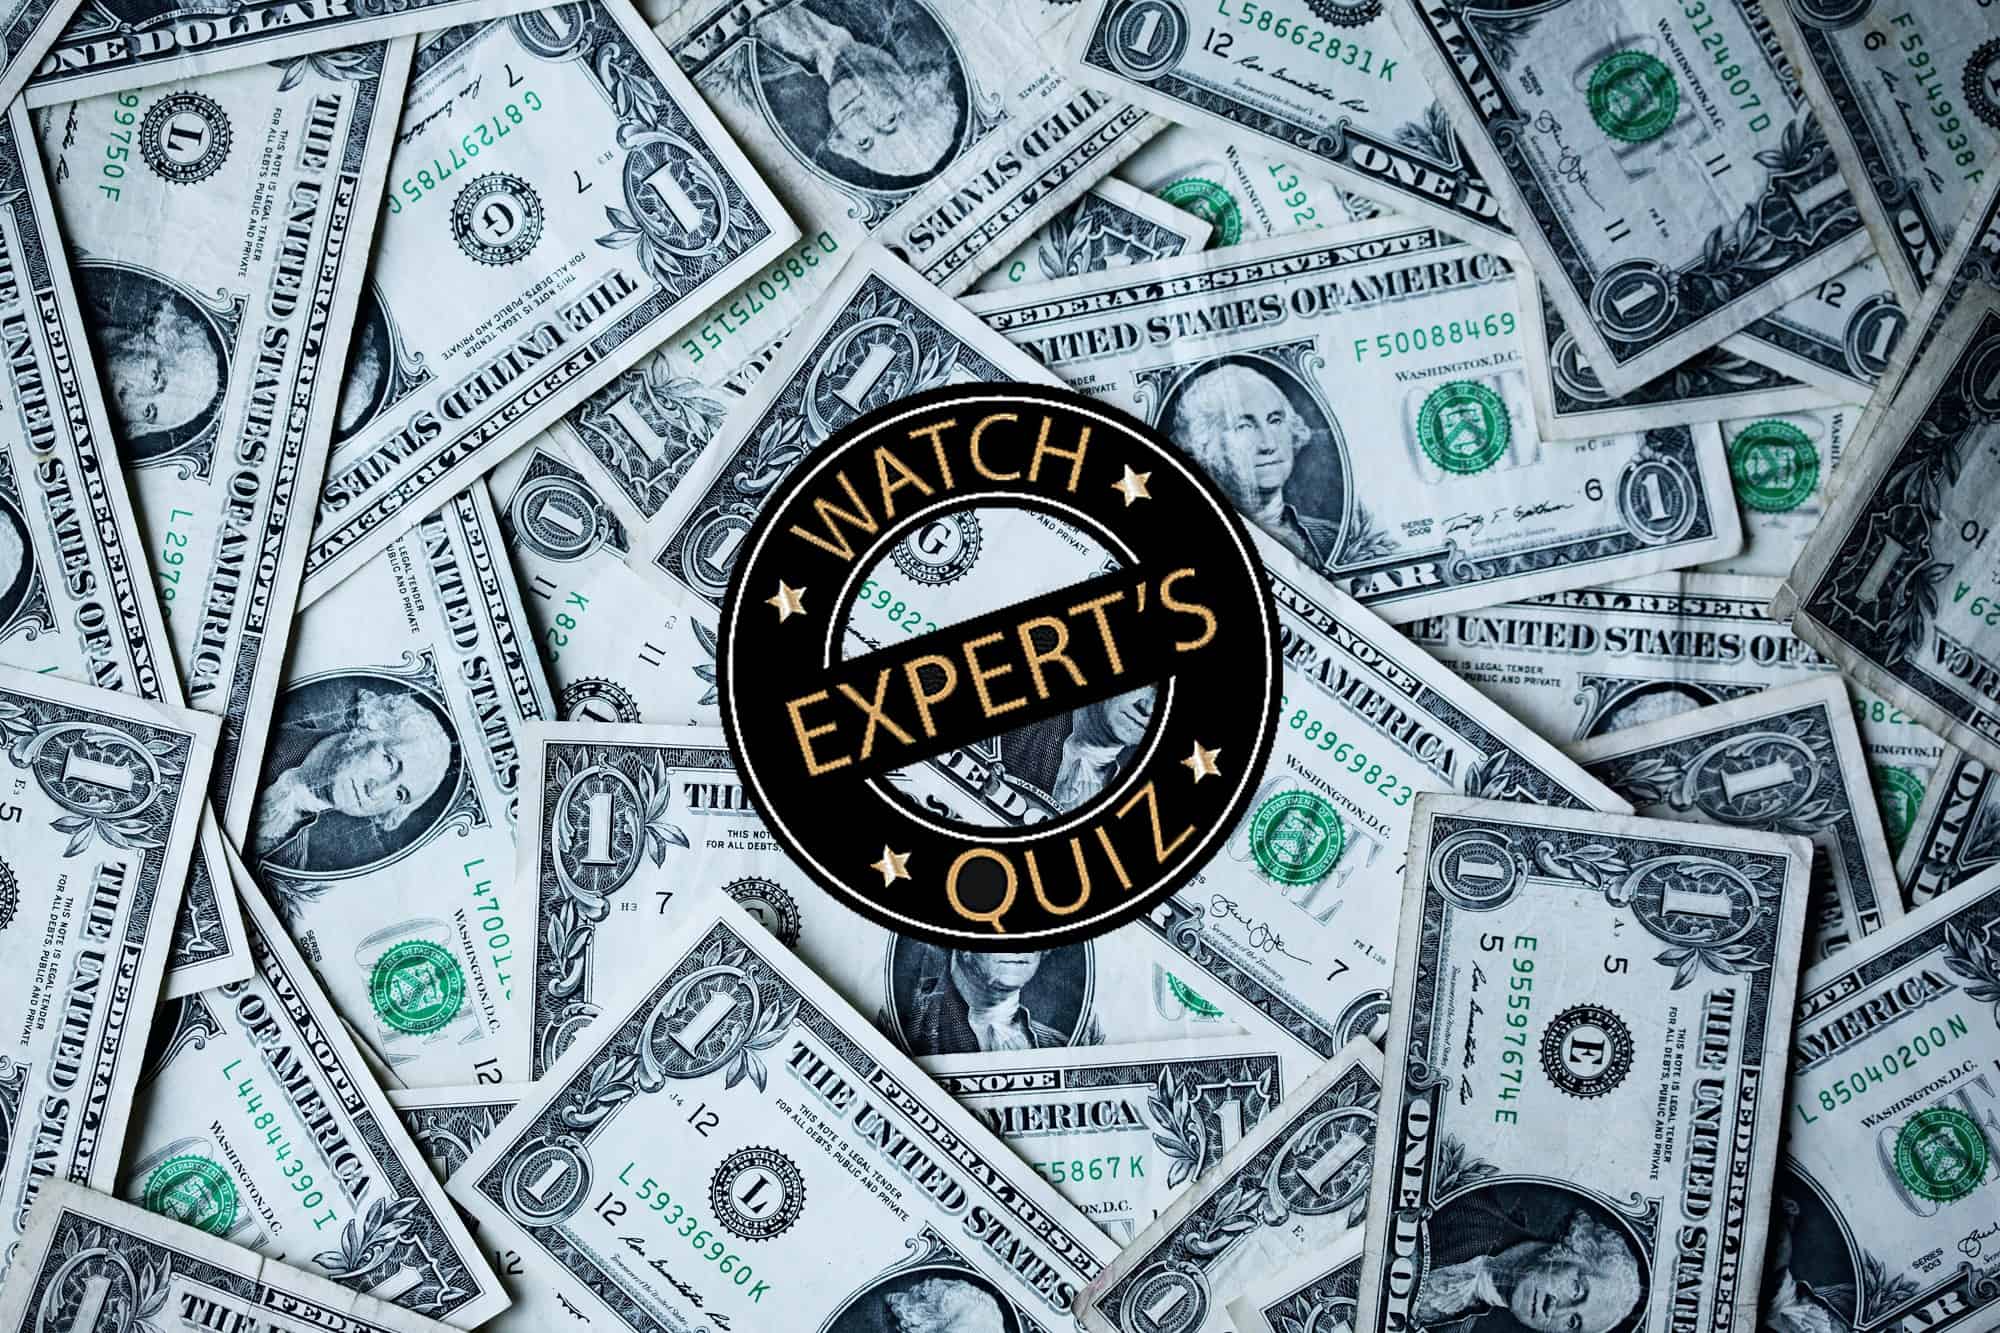 Quiz: Which watch is most expensive?